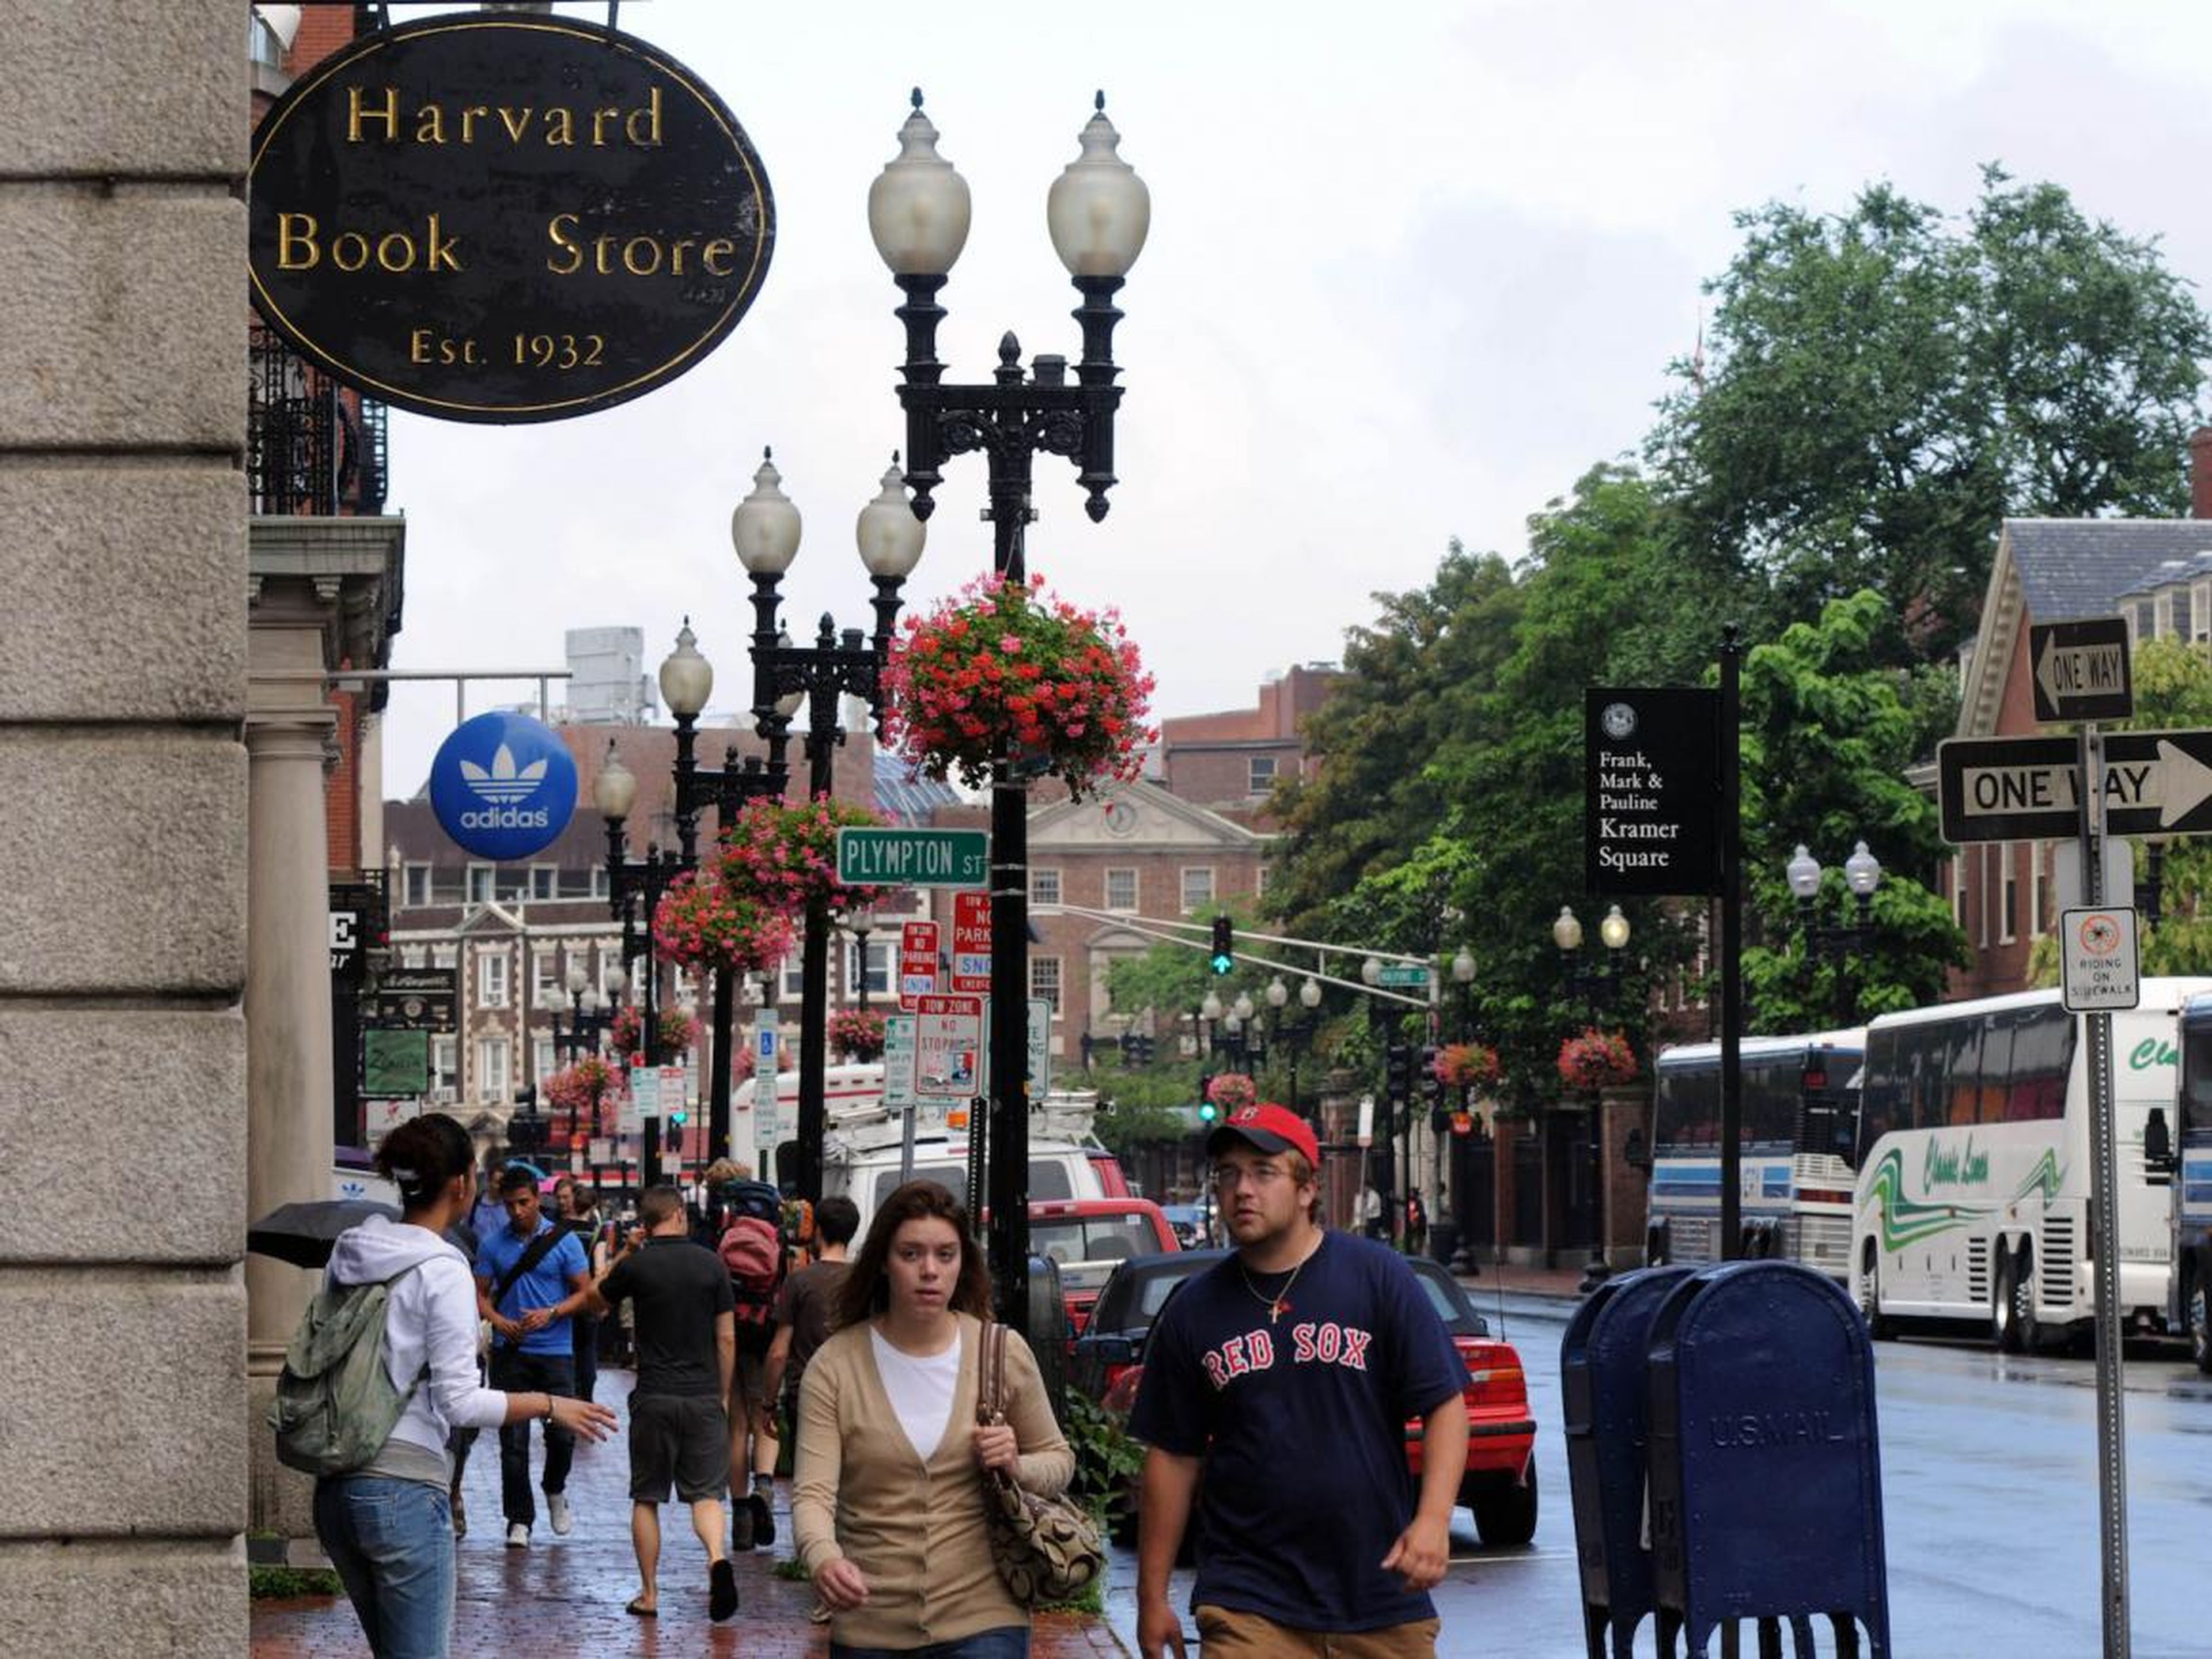 More than 8 million tourists venture to Harvard Square each year.